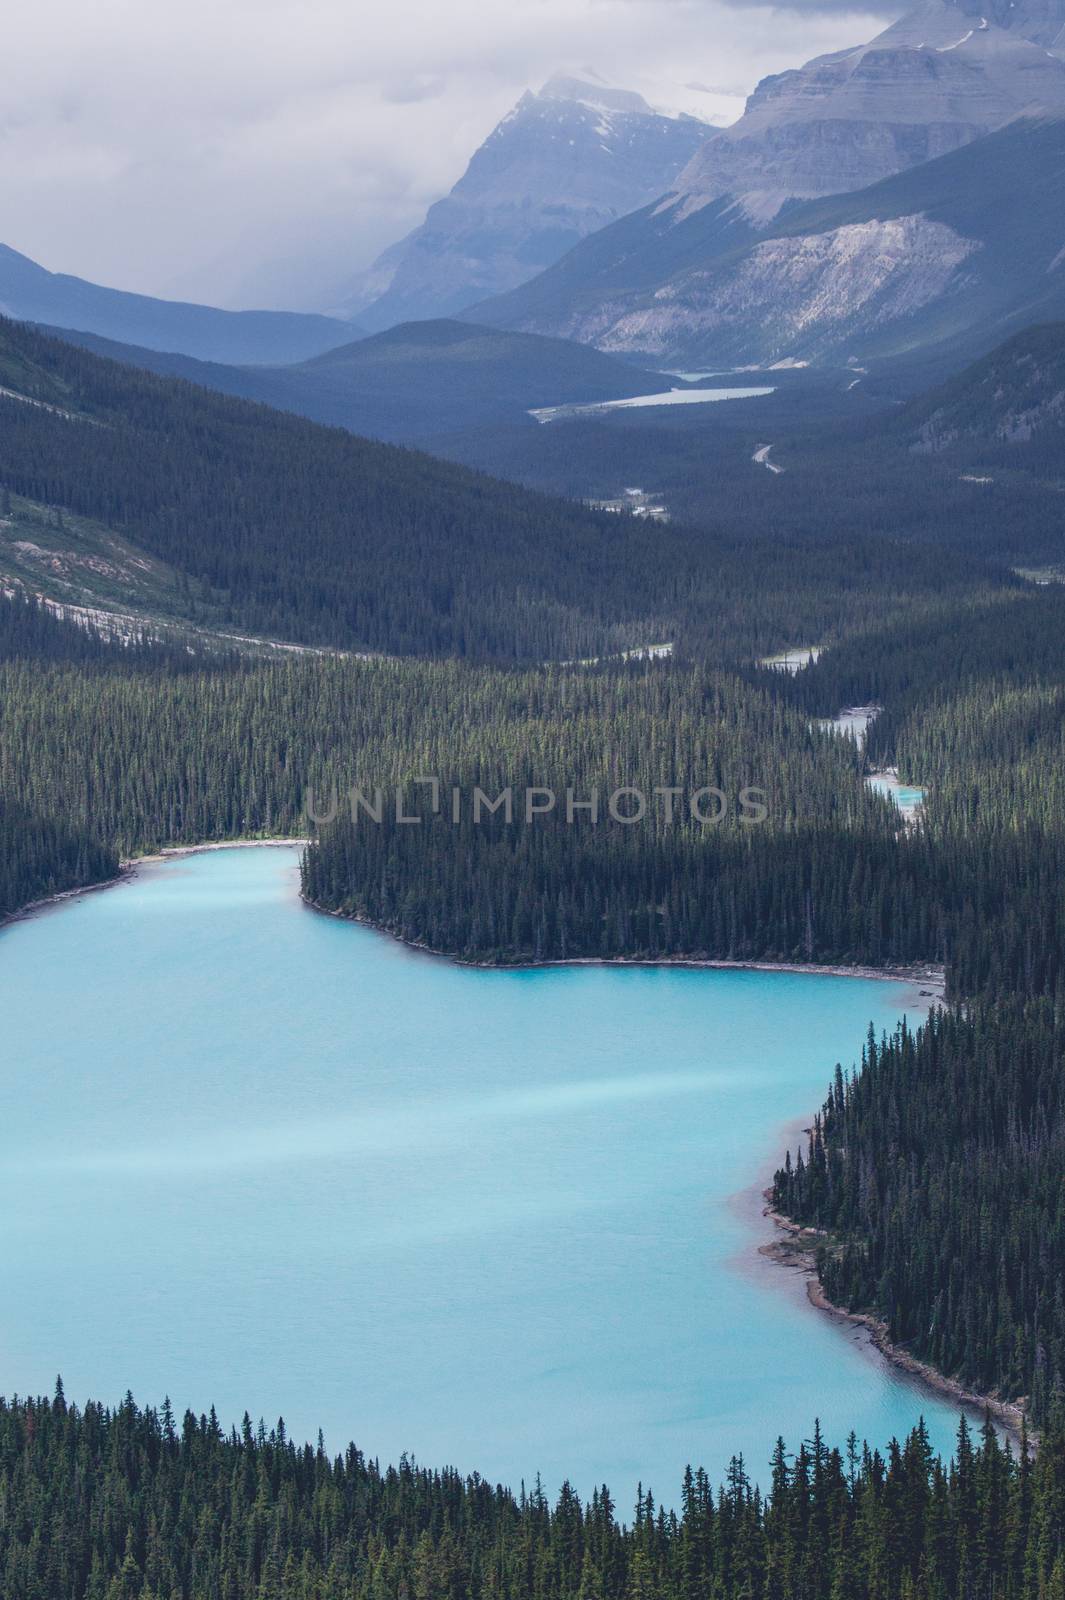 Blue mountain lake surrounded by pine trees